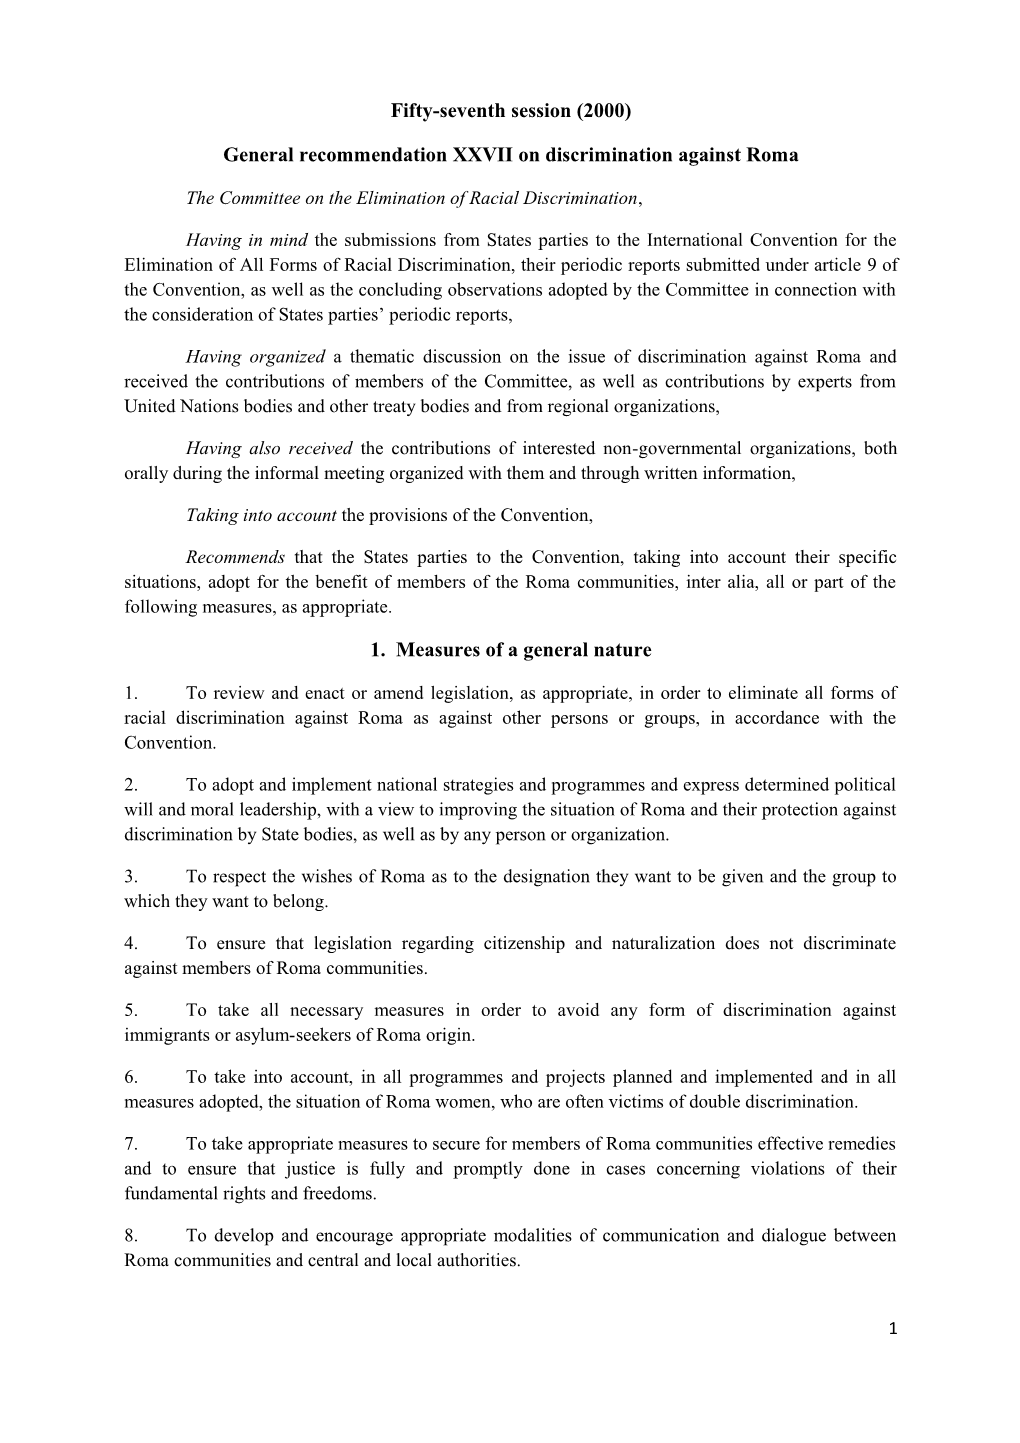 General Recommendation XXVII on Discrimination Against Roma